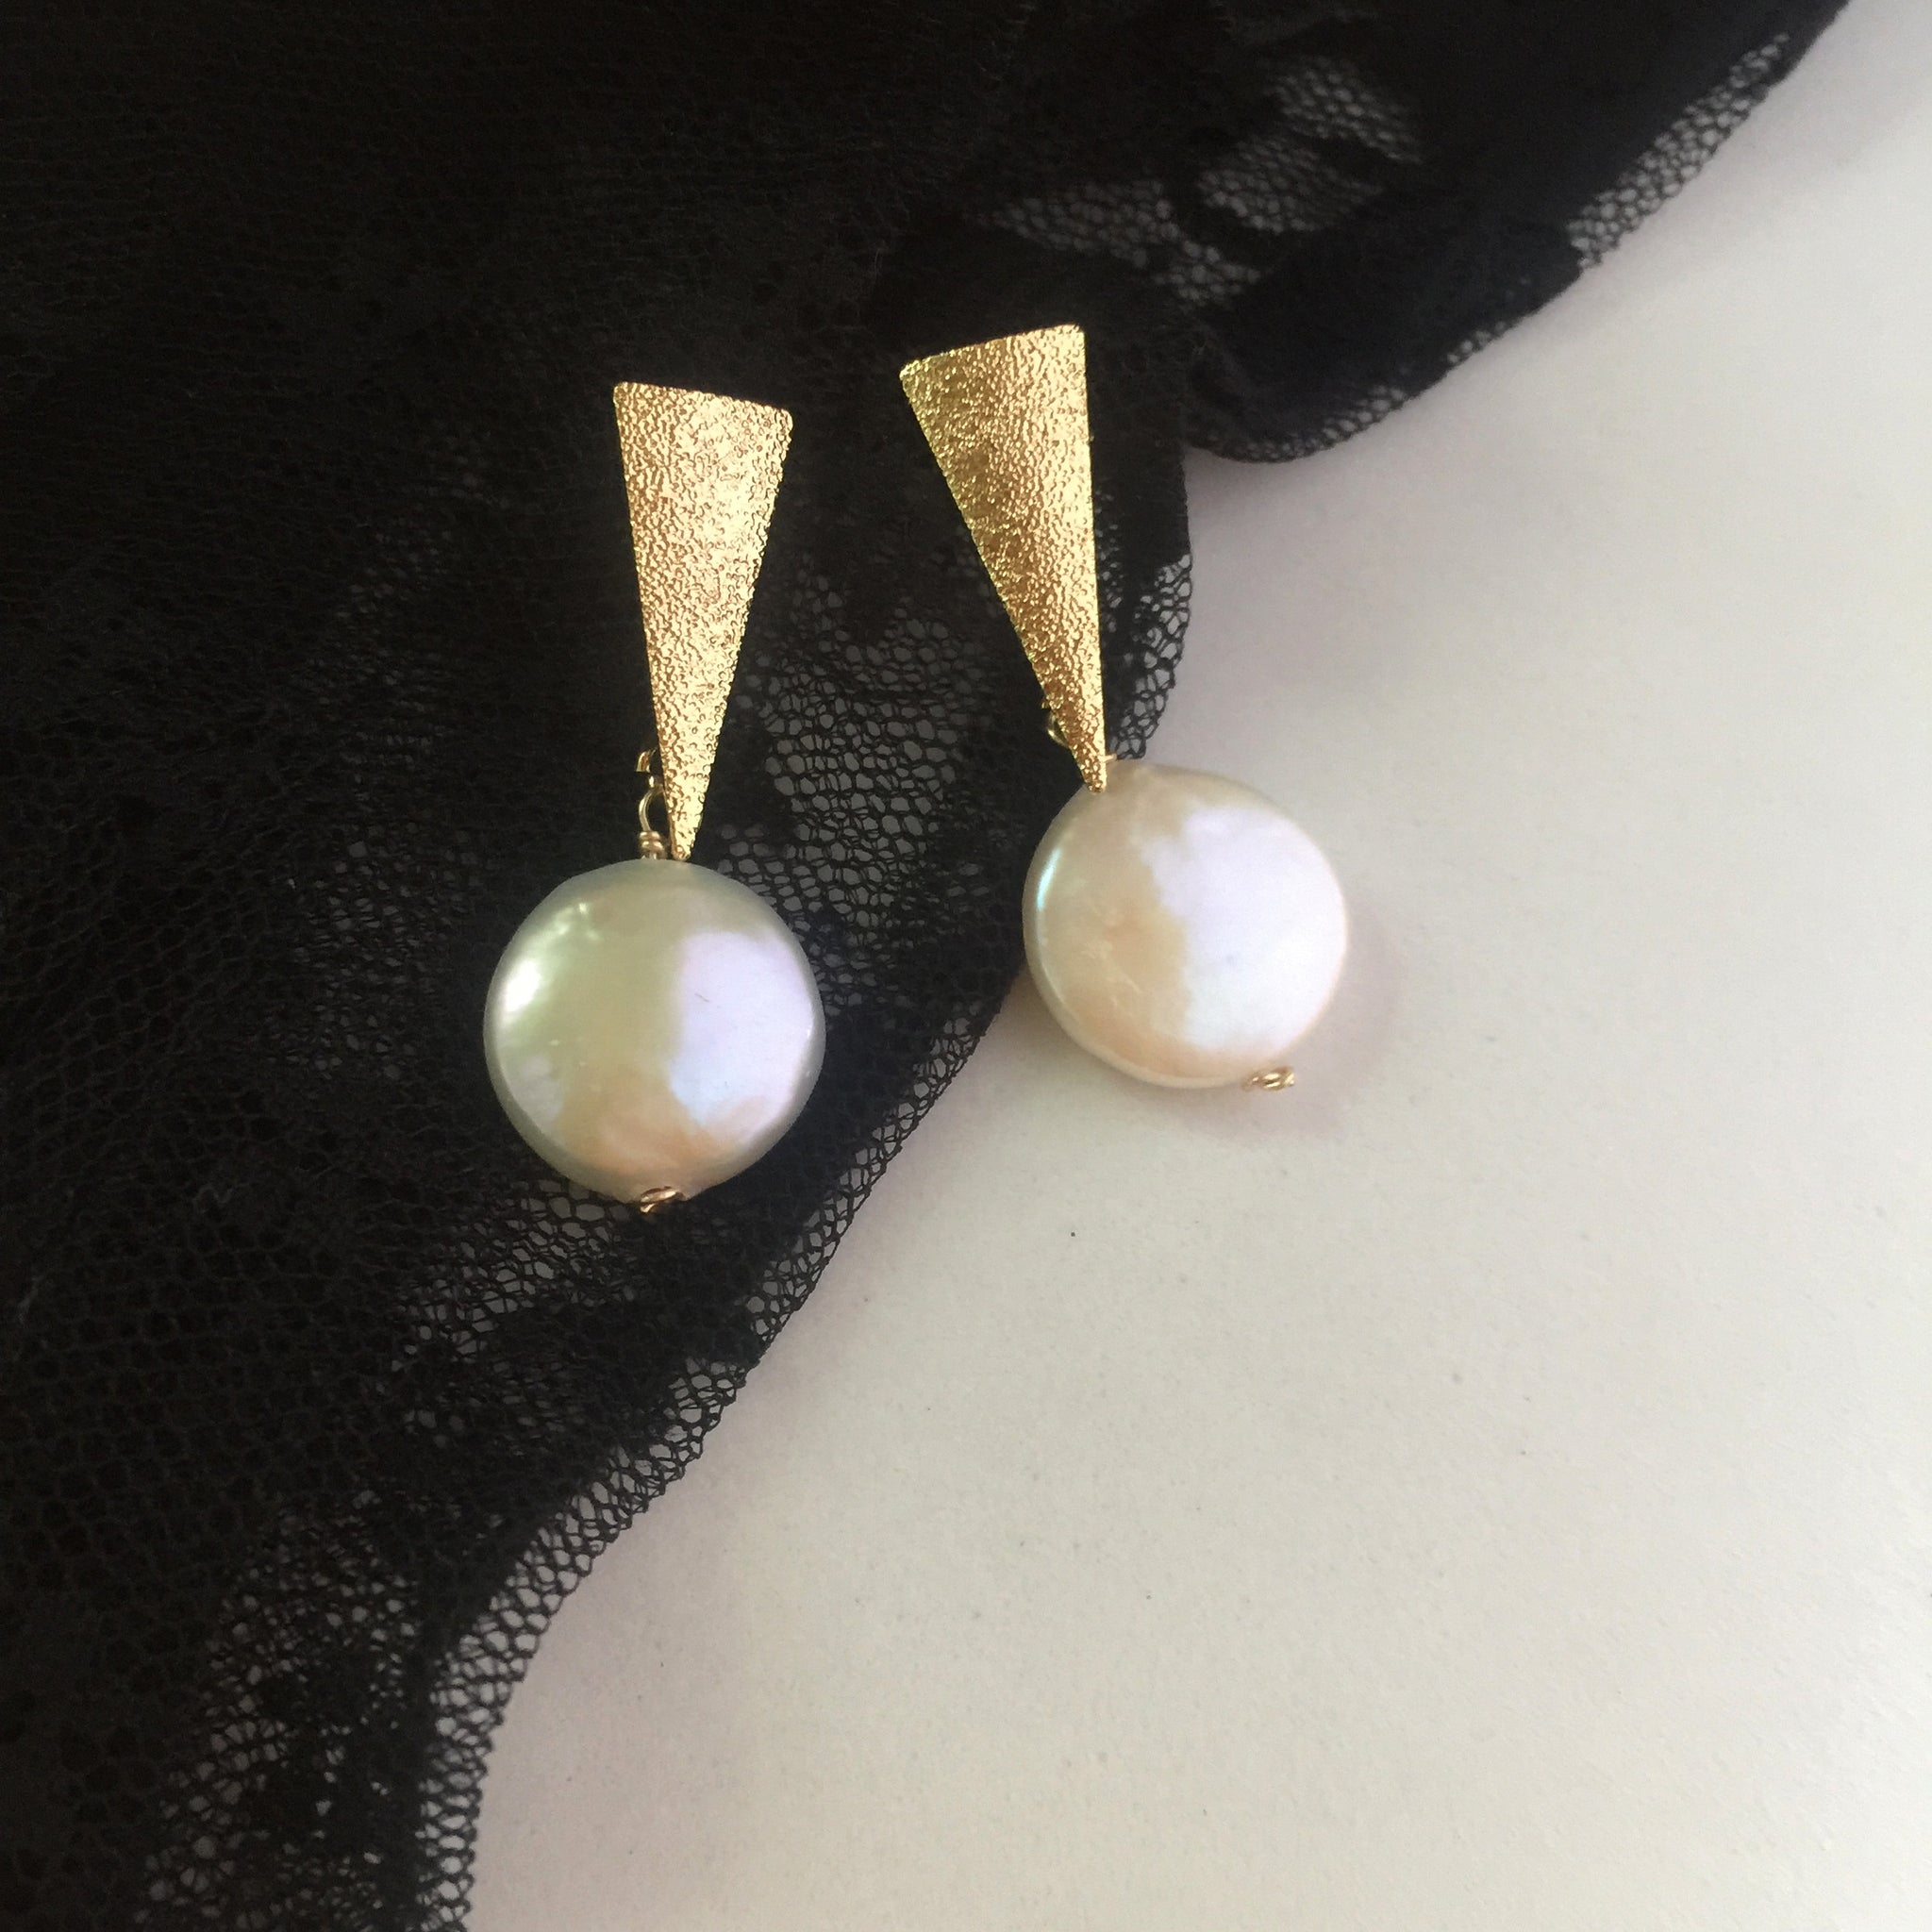 Pearl Earrings Drop Gold, Gift Ideas for Women, Natural Freshwater Coin Pearl Earrings